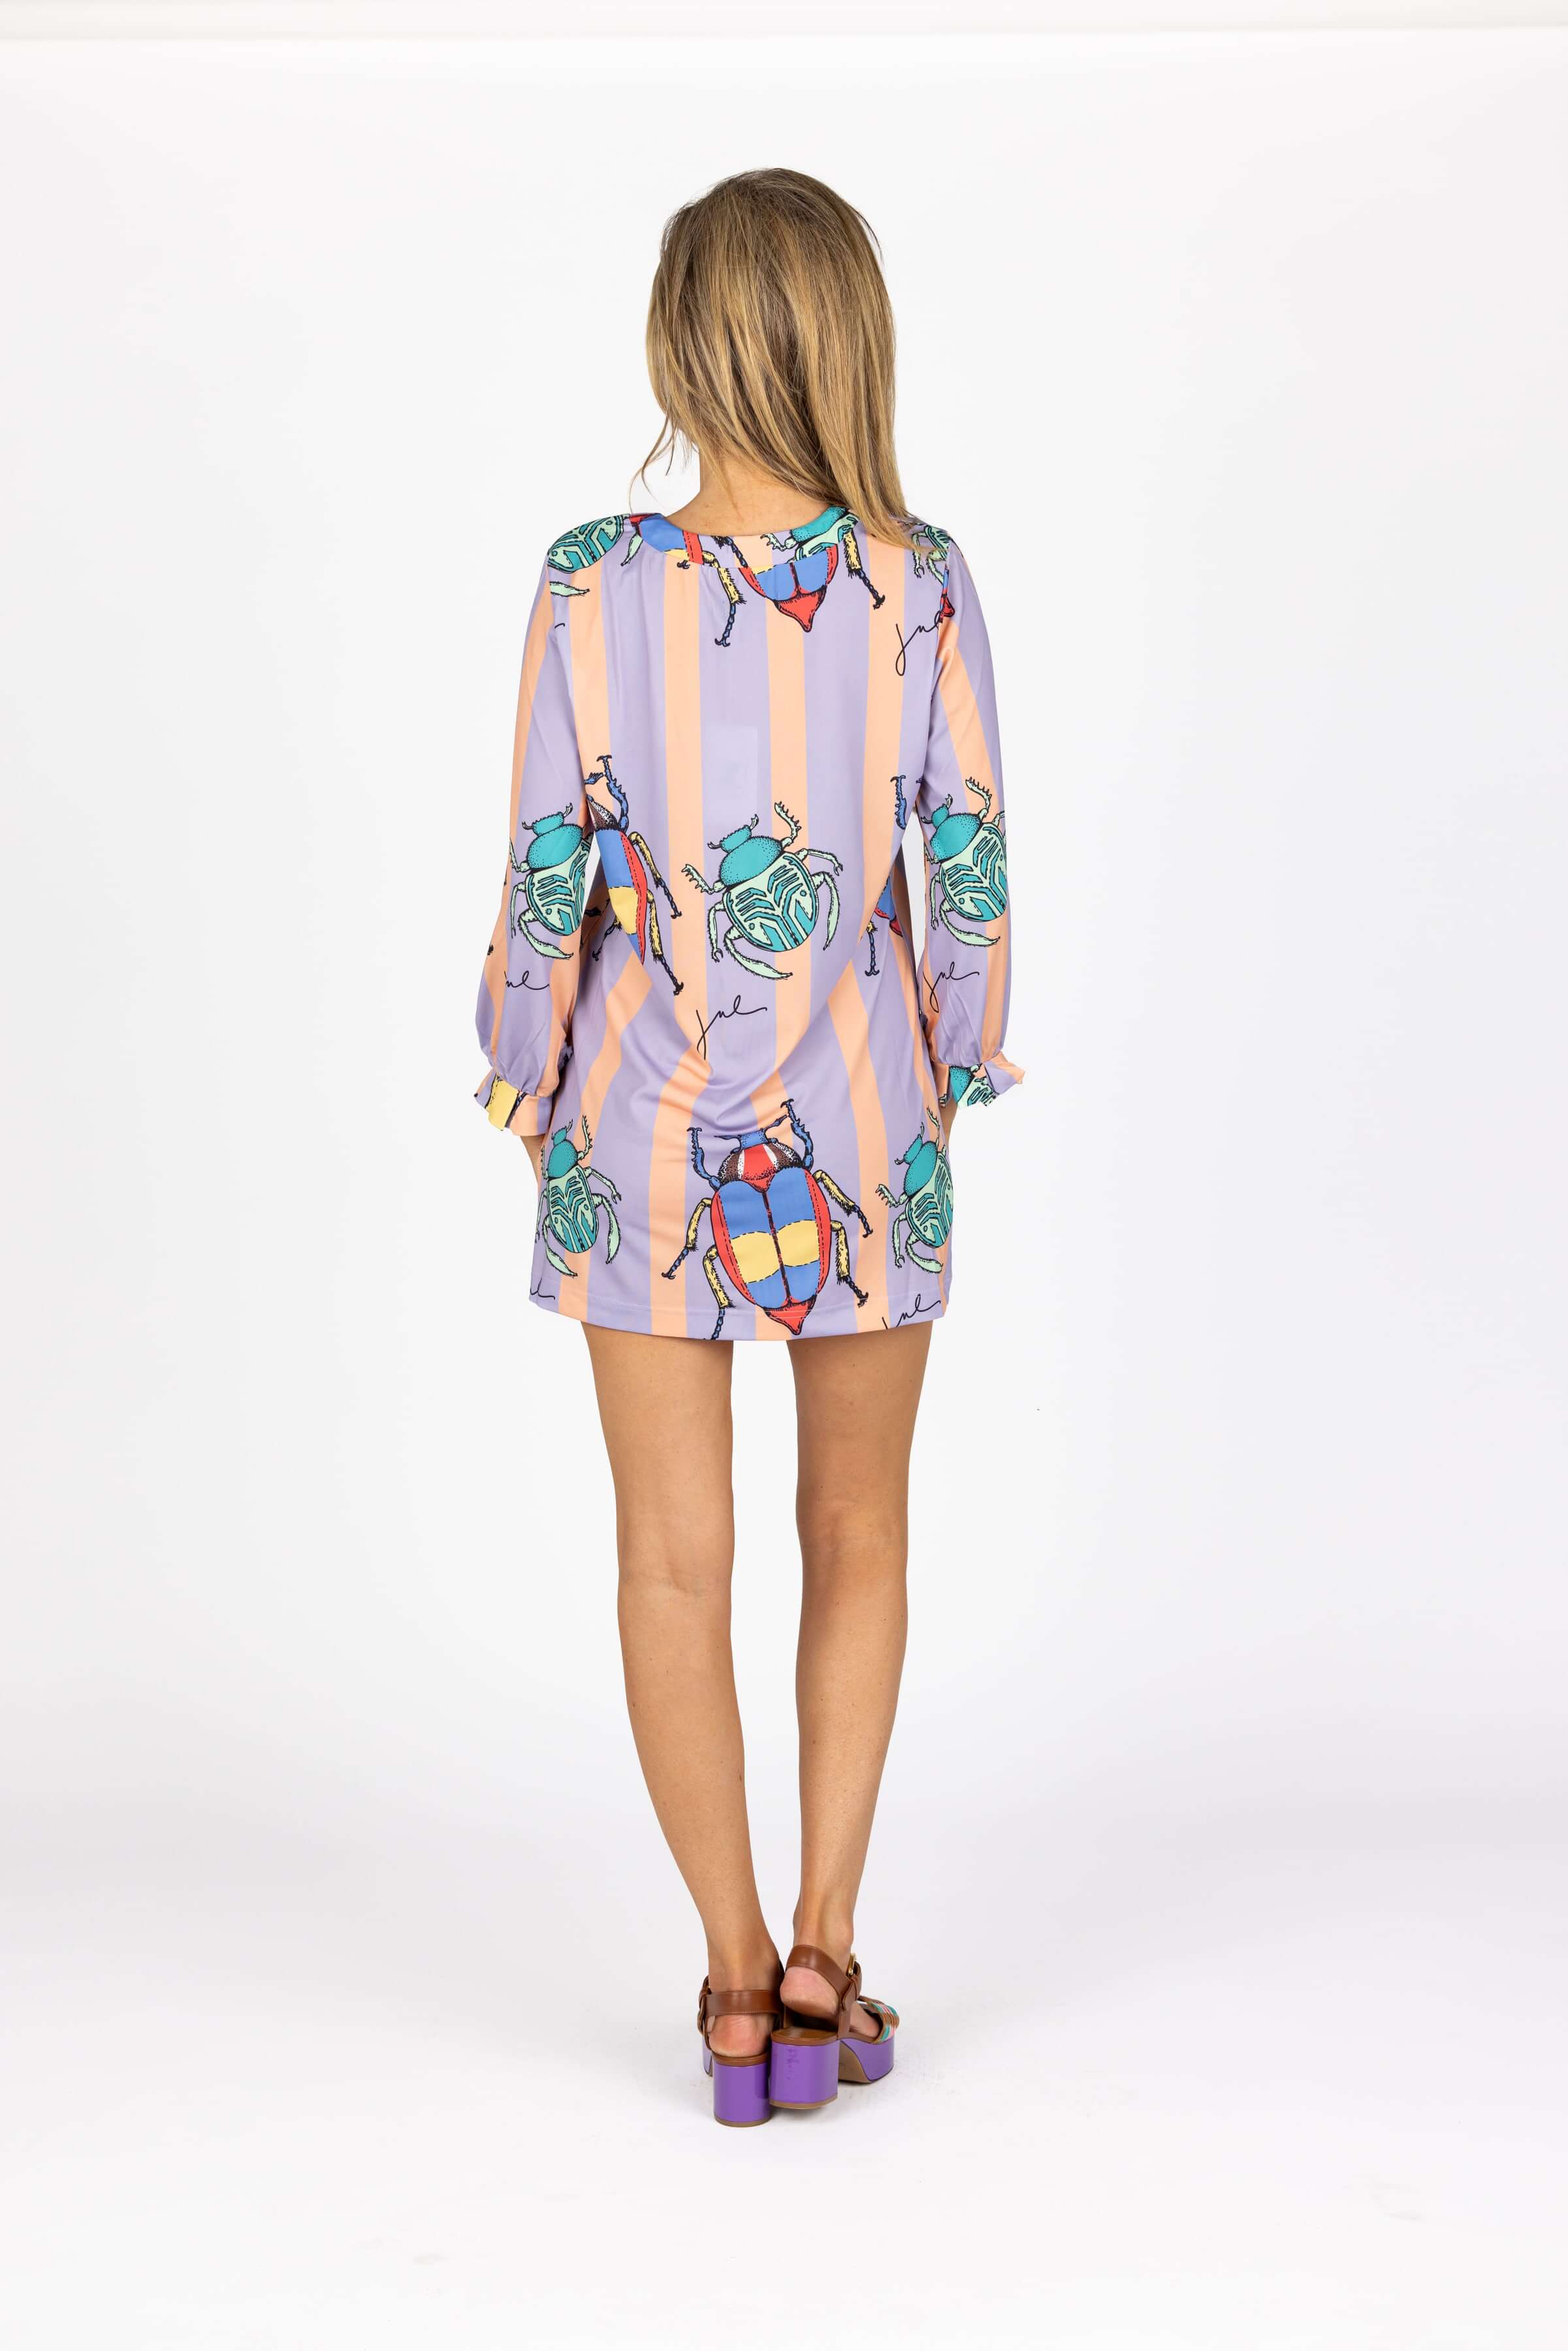 The Twiggy Coverup in Beetle Bugs Lavender